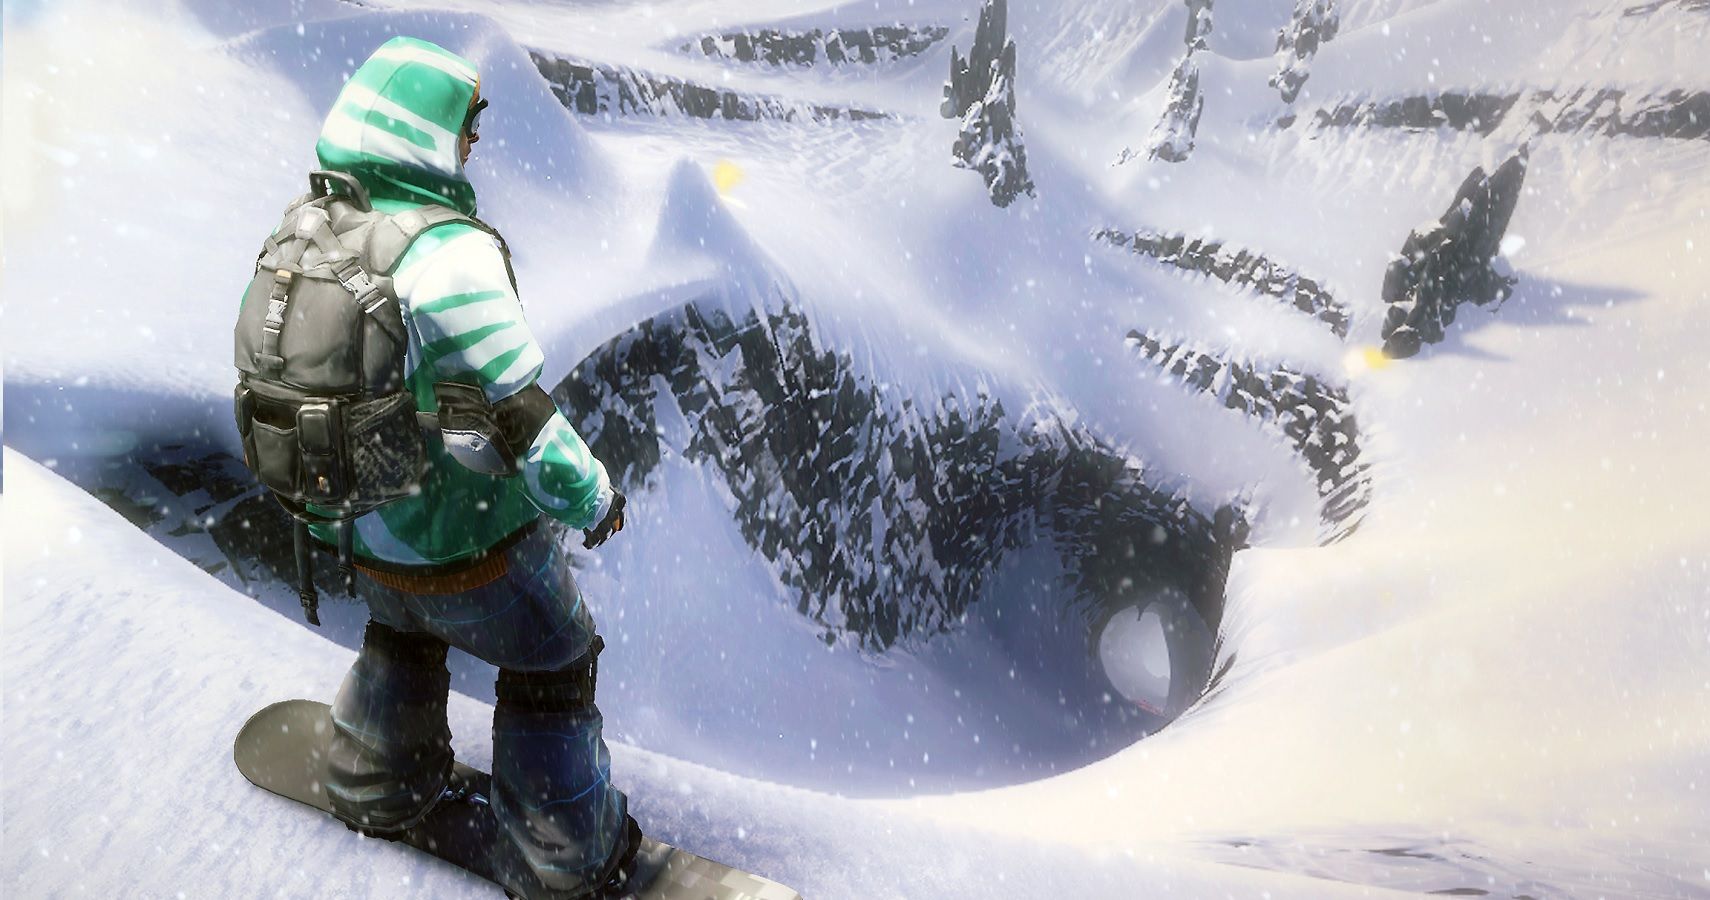 7 Fun Snowboarding Video Games to Play